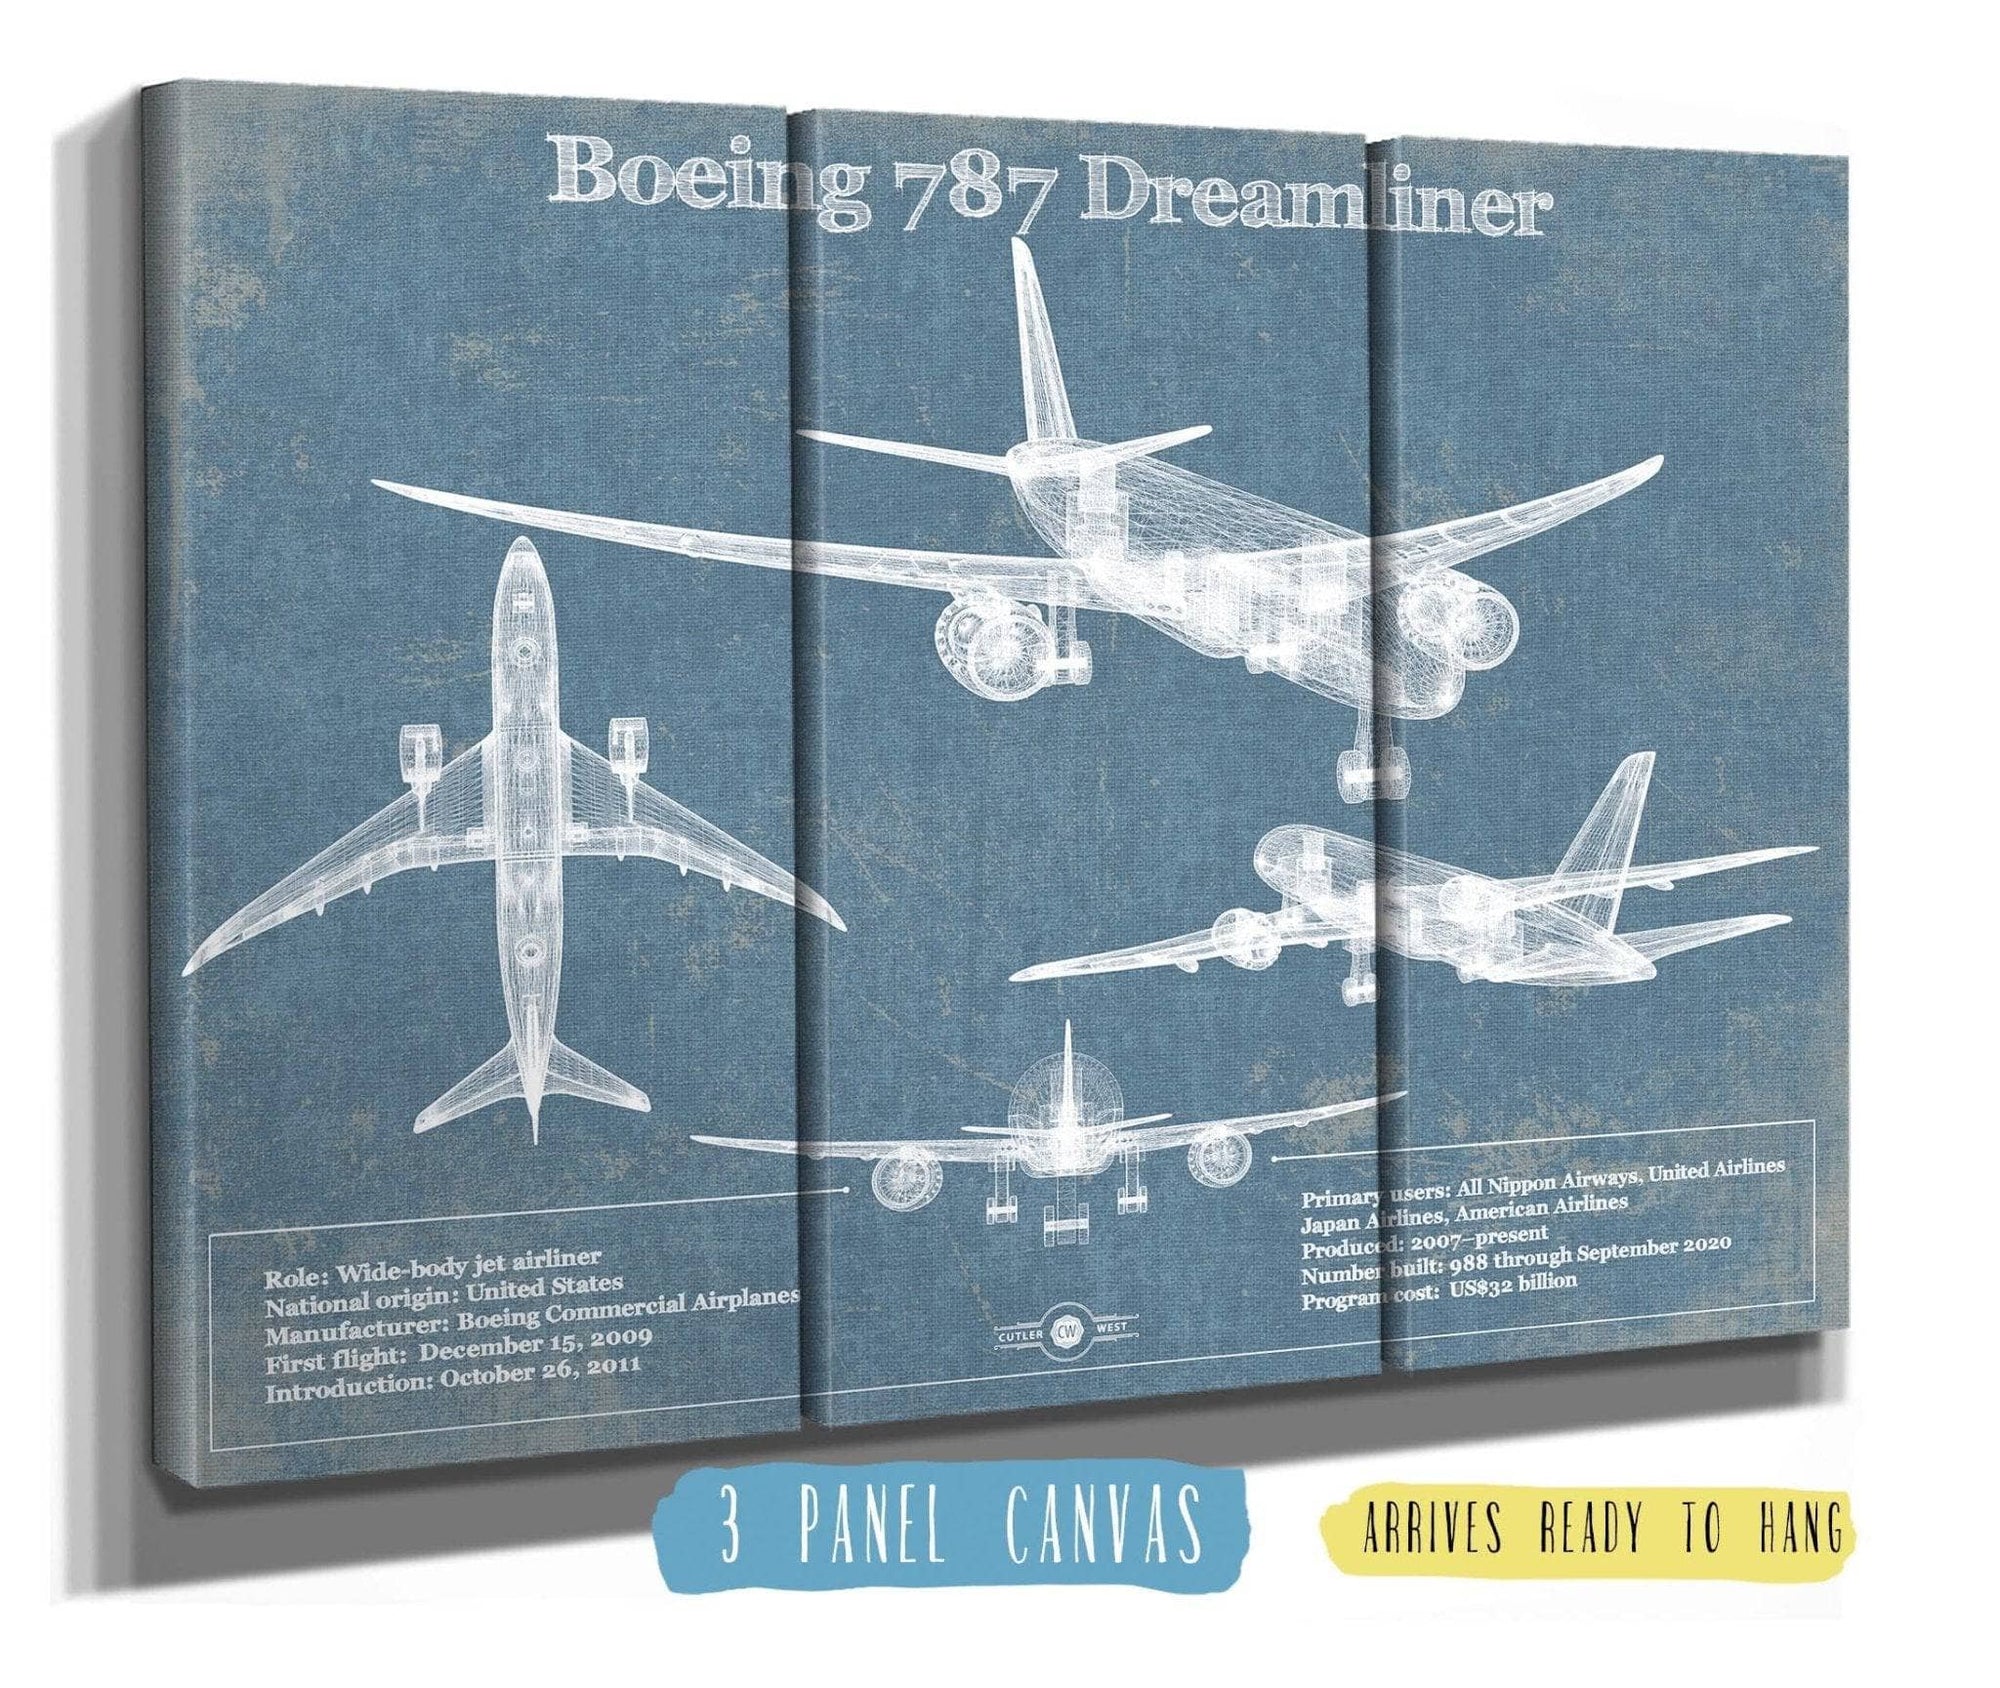 Cutler West 48" x 32" / 3 Panel Canvas Wrap Boeing 787 Dreamliner Vintage Aviation Blueprint Print - Custom Pilot Name Can Be Added 897604203-48"-x-32"47335